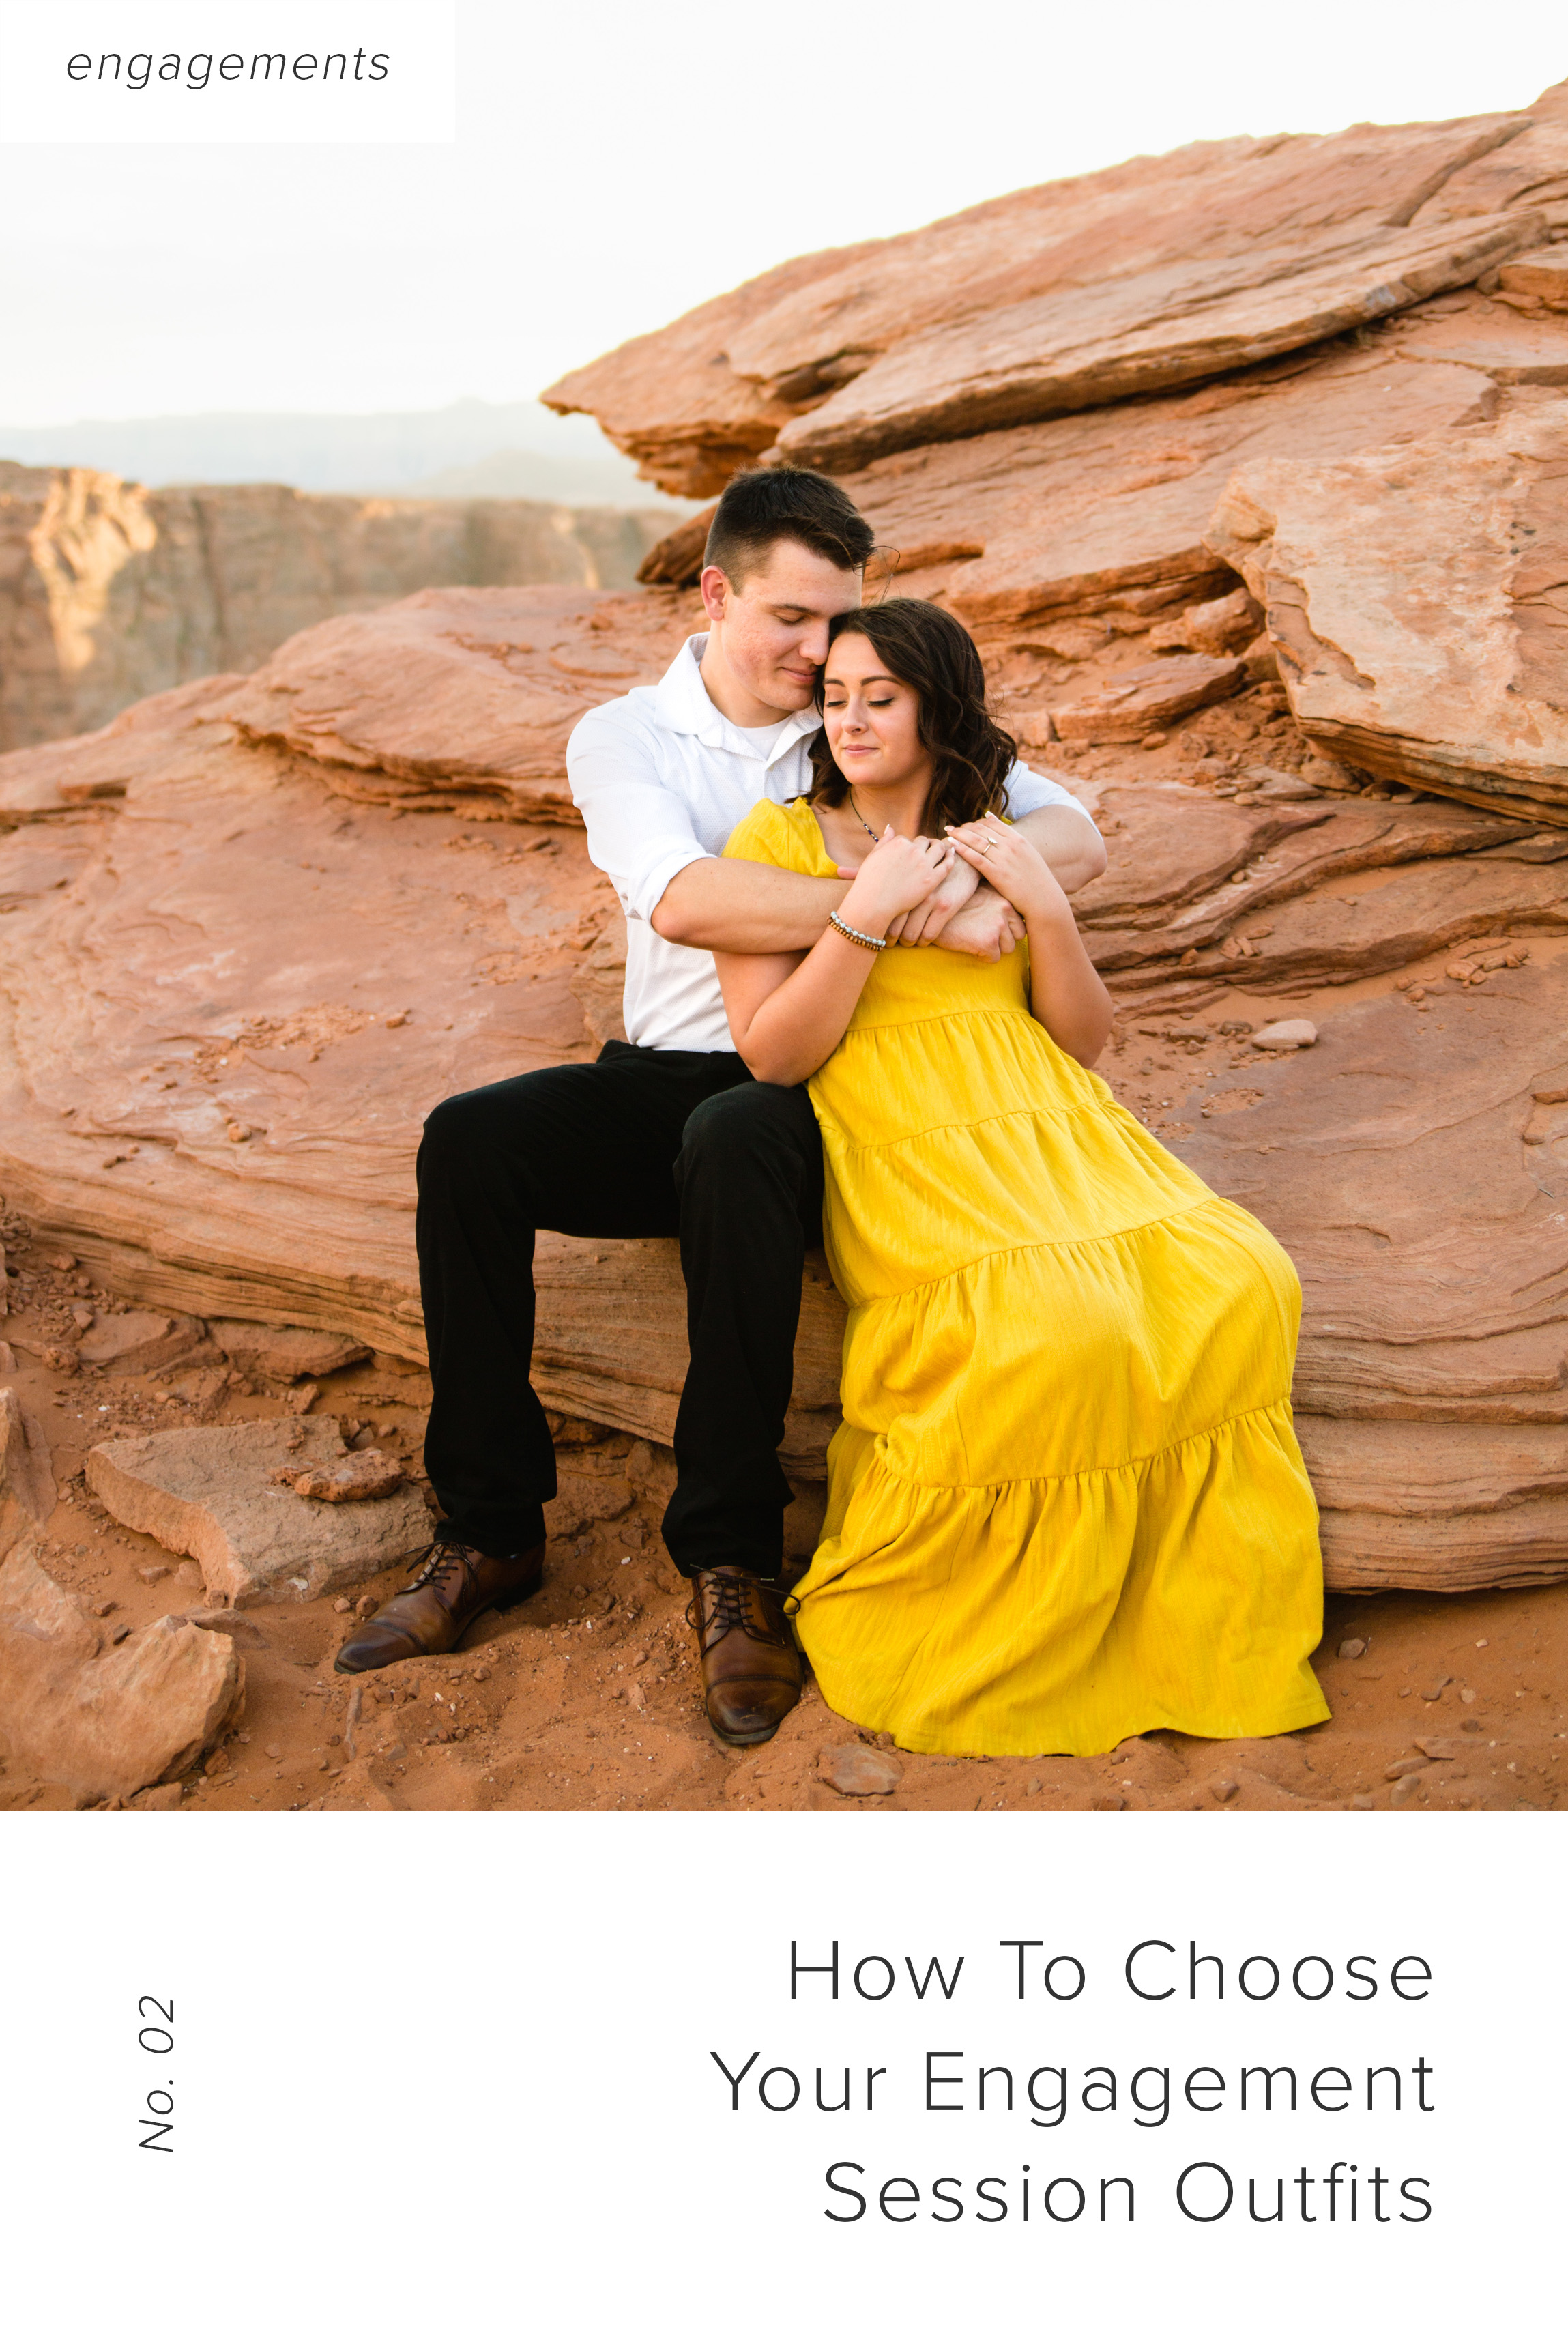 How to choose your engagement session outfits by Phoenix wedding photographer PMA Photography.